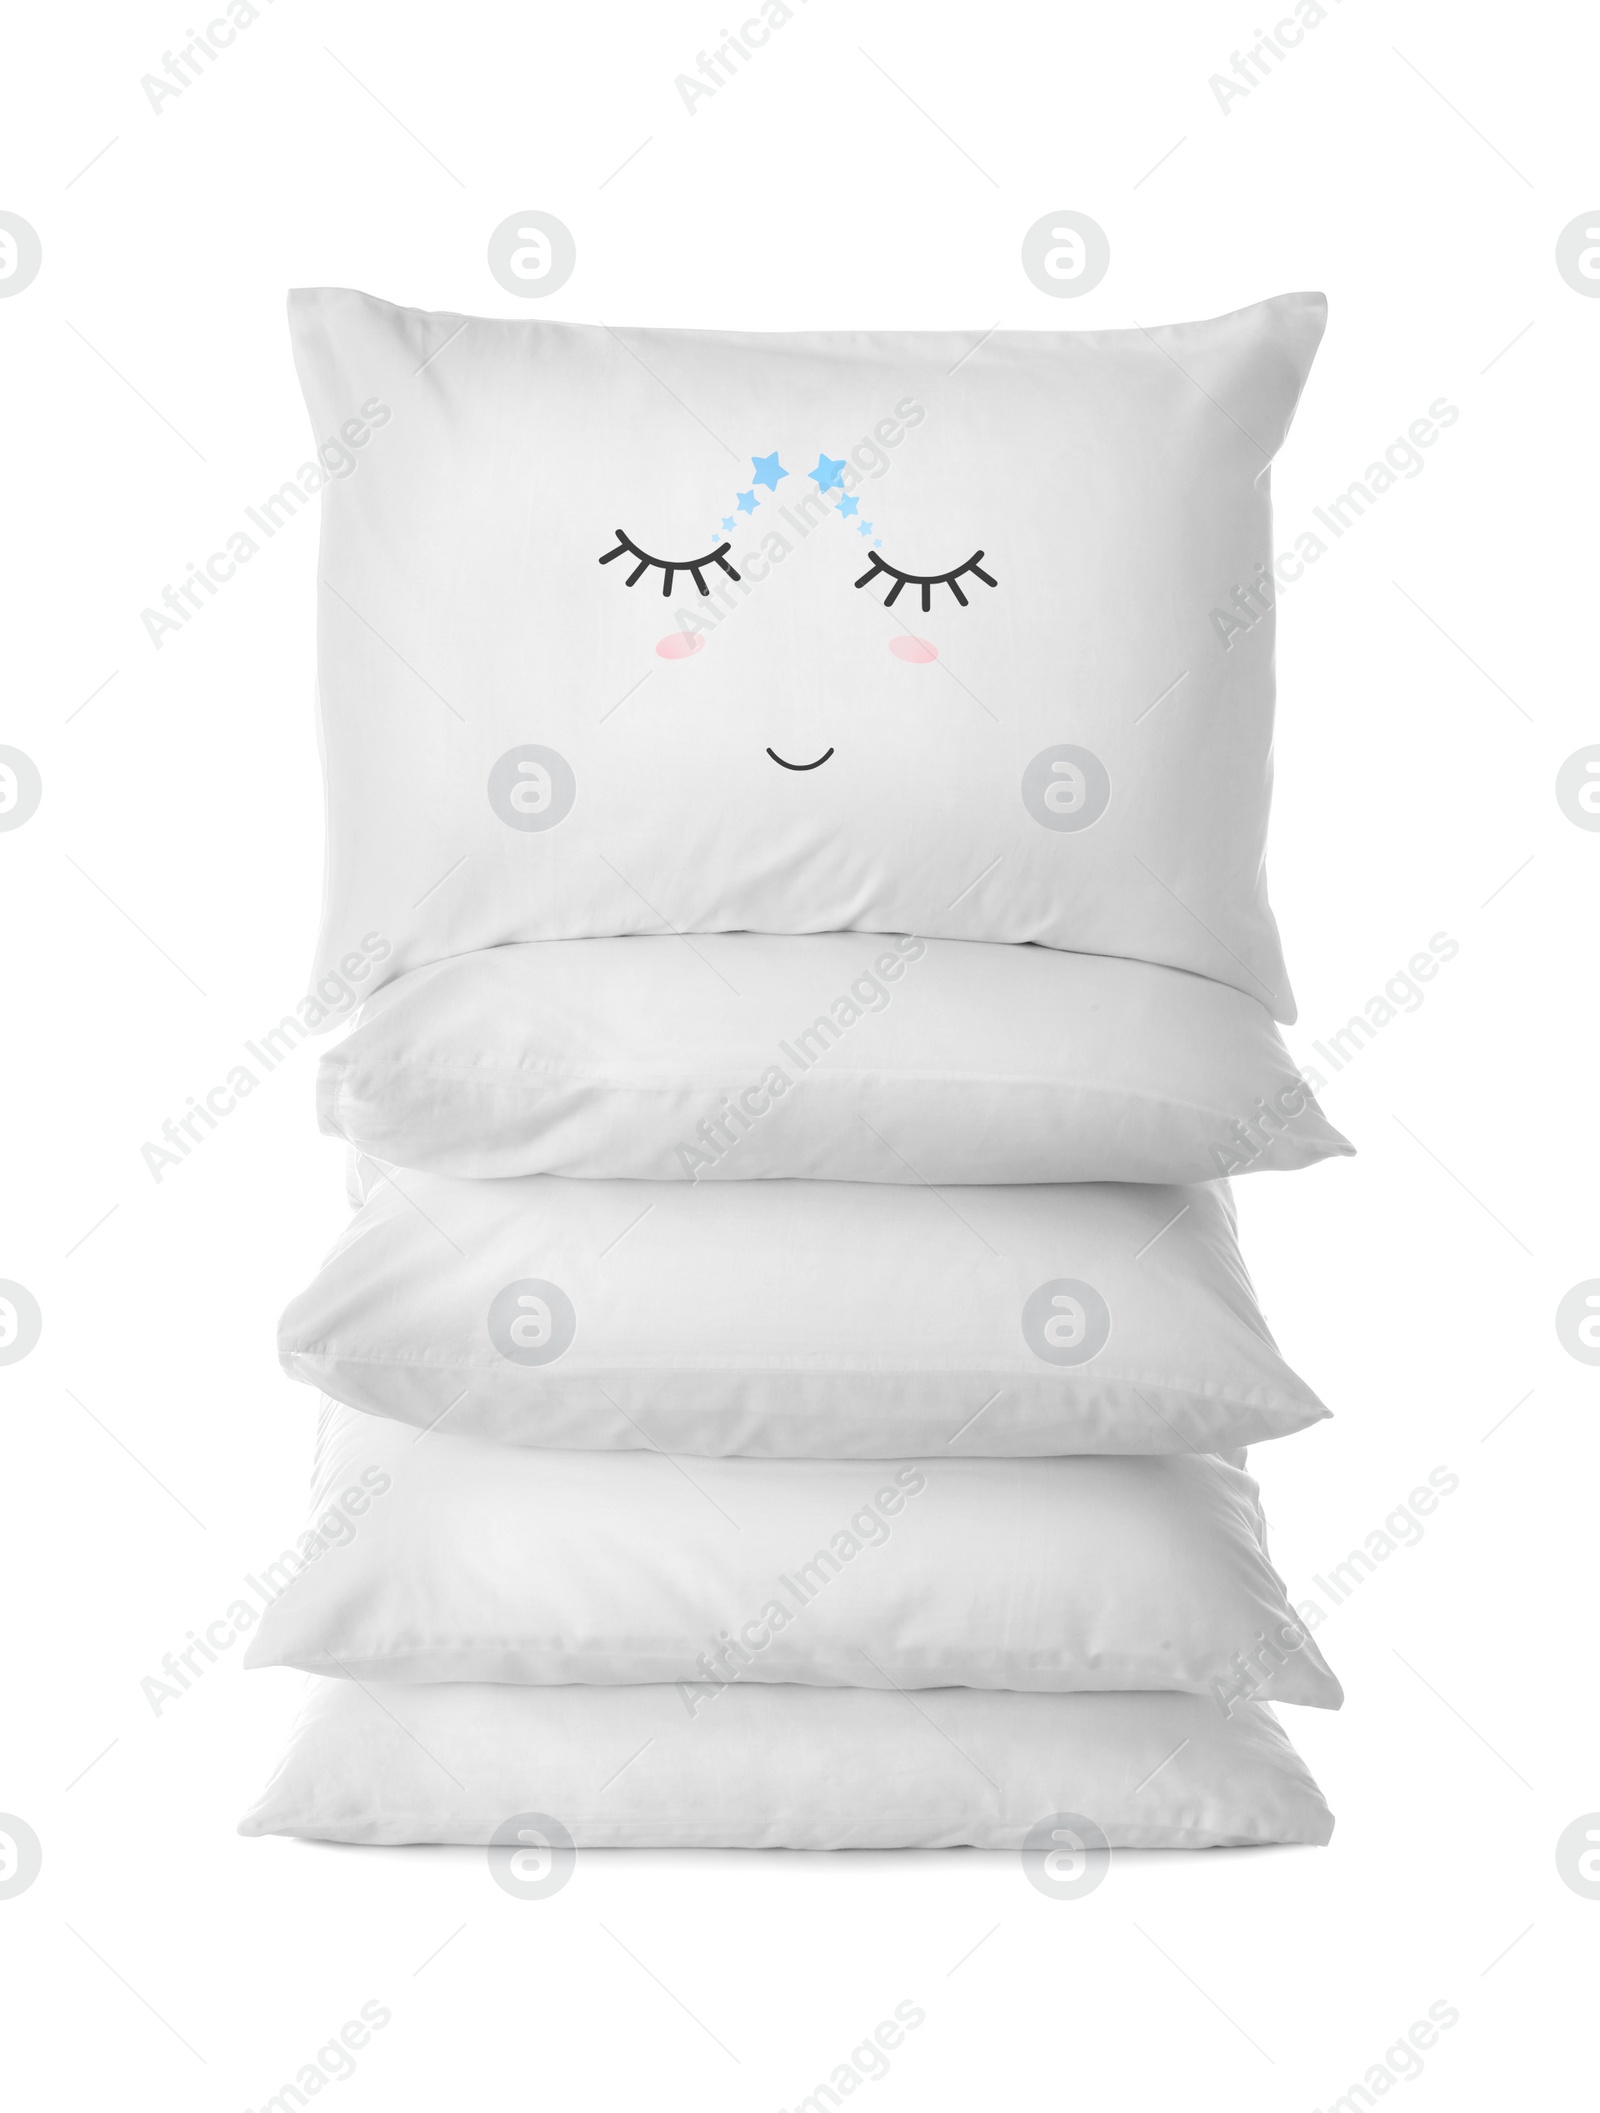 Image of Stack of soft pillows, one with cute face on white background